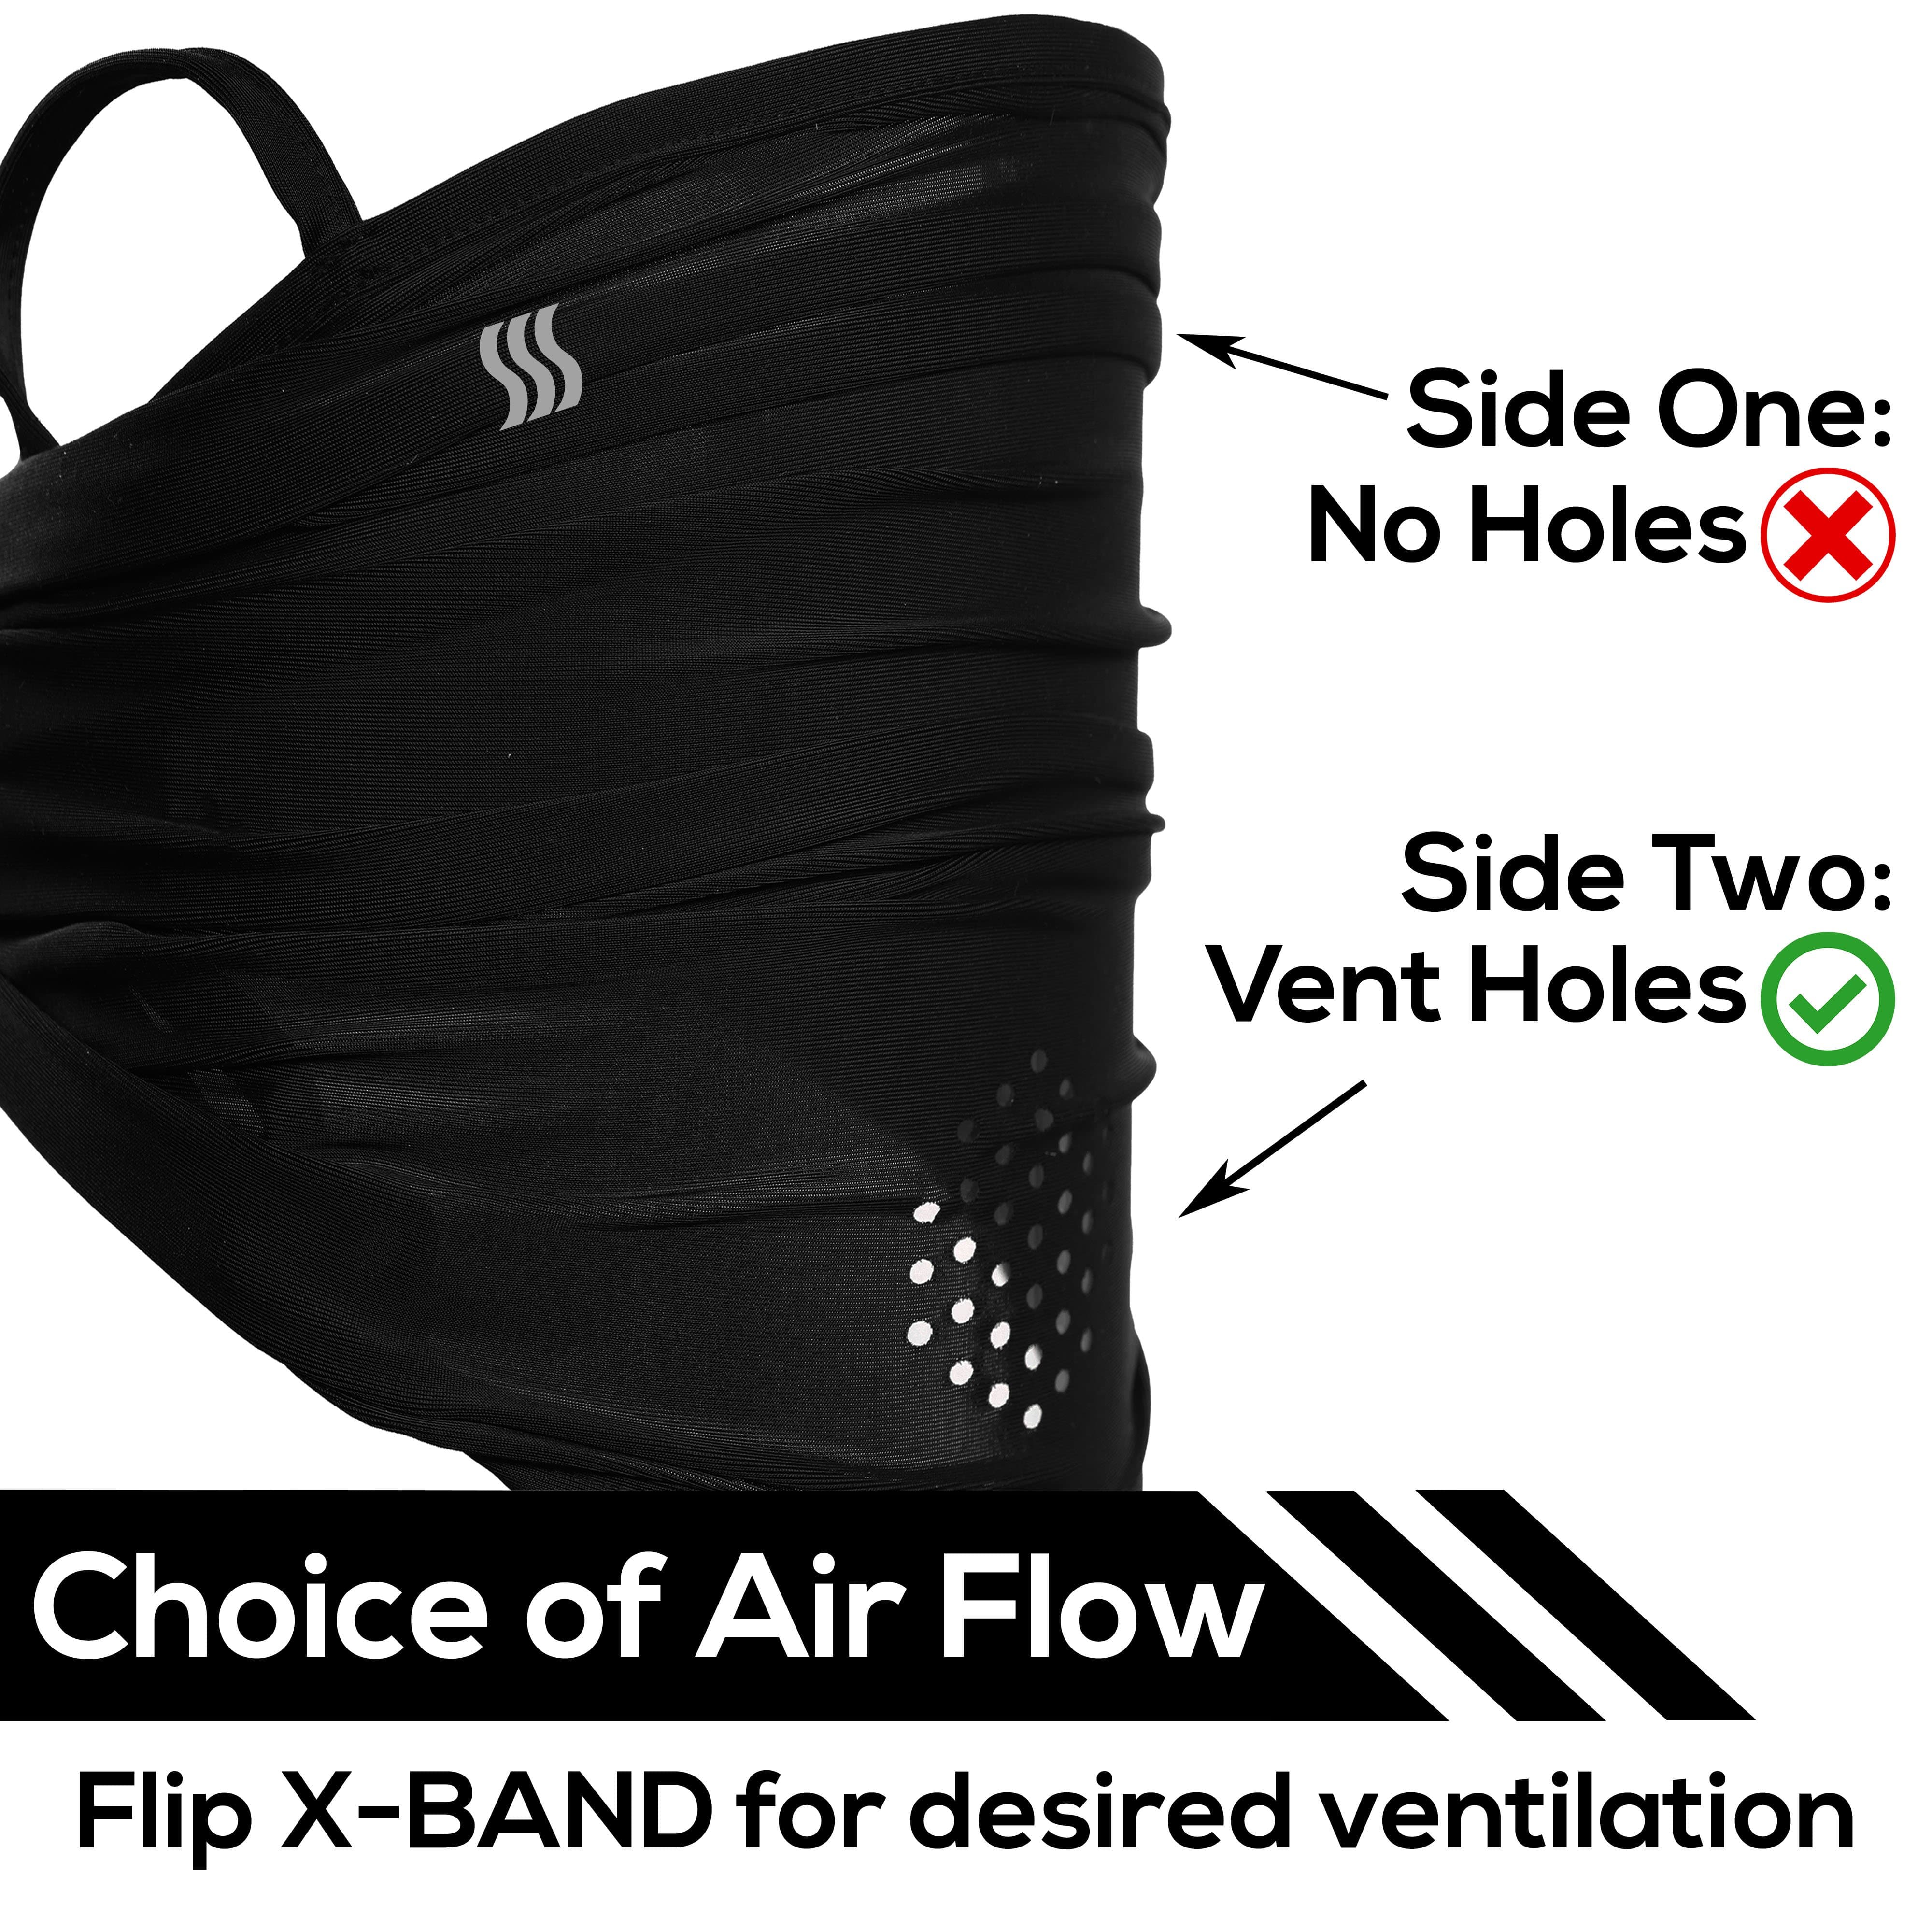 Choice of air flow when wearing this headband as a face mask. You can choose to have air vents or not.